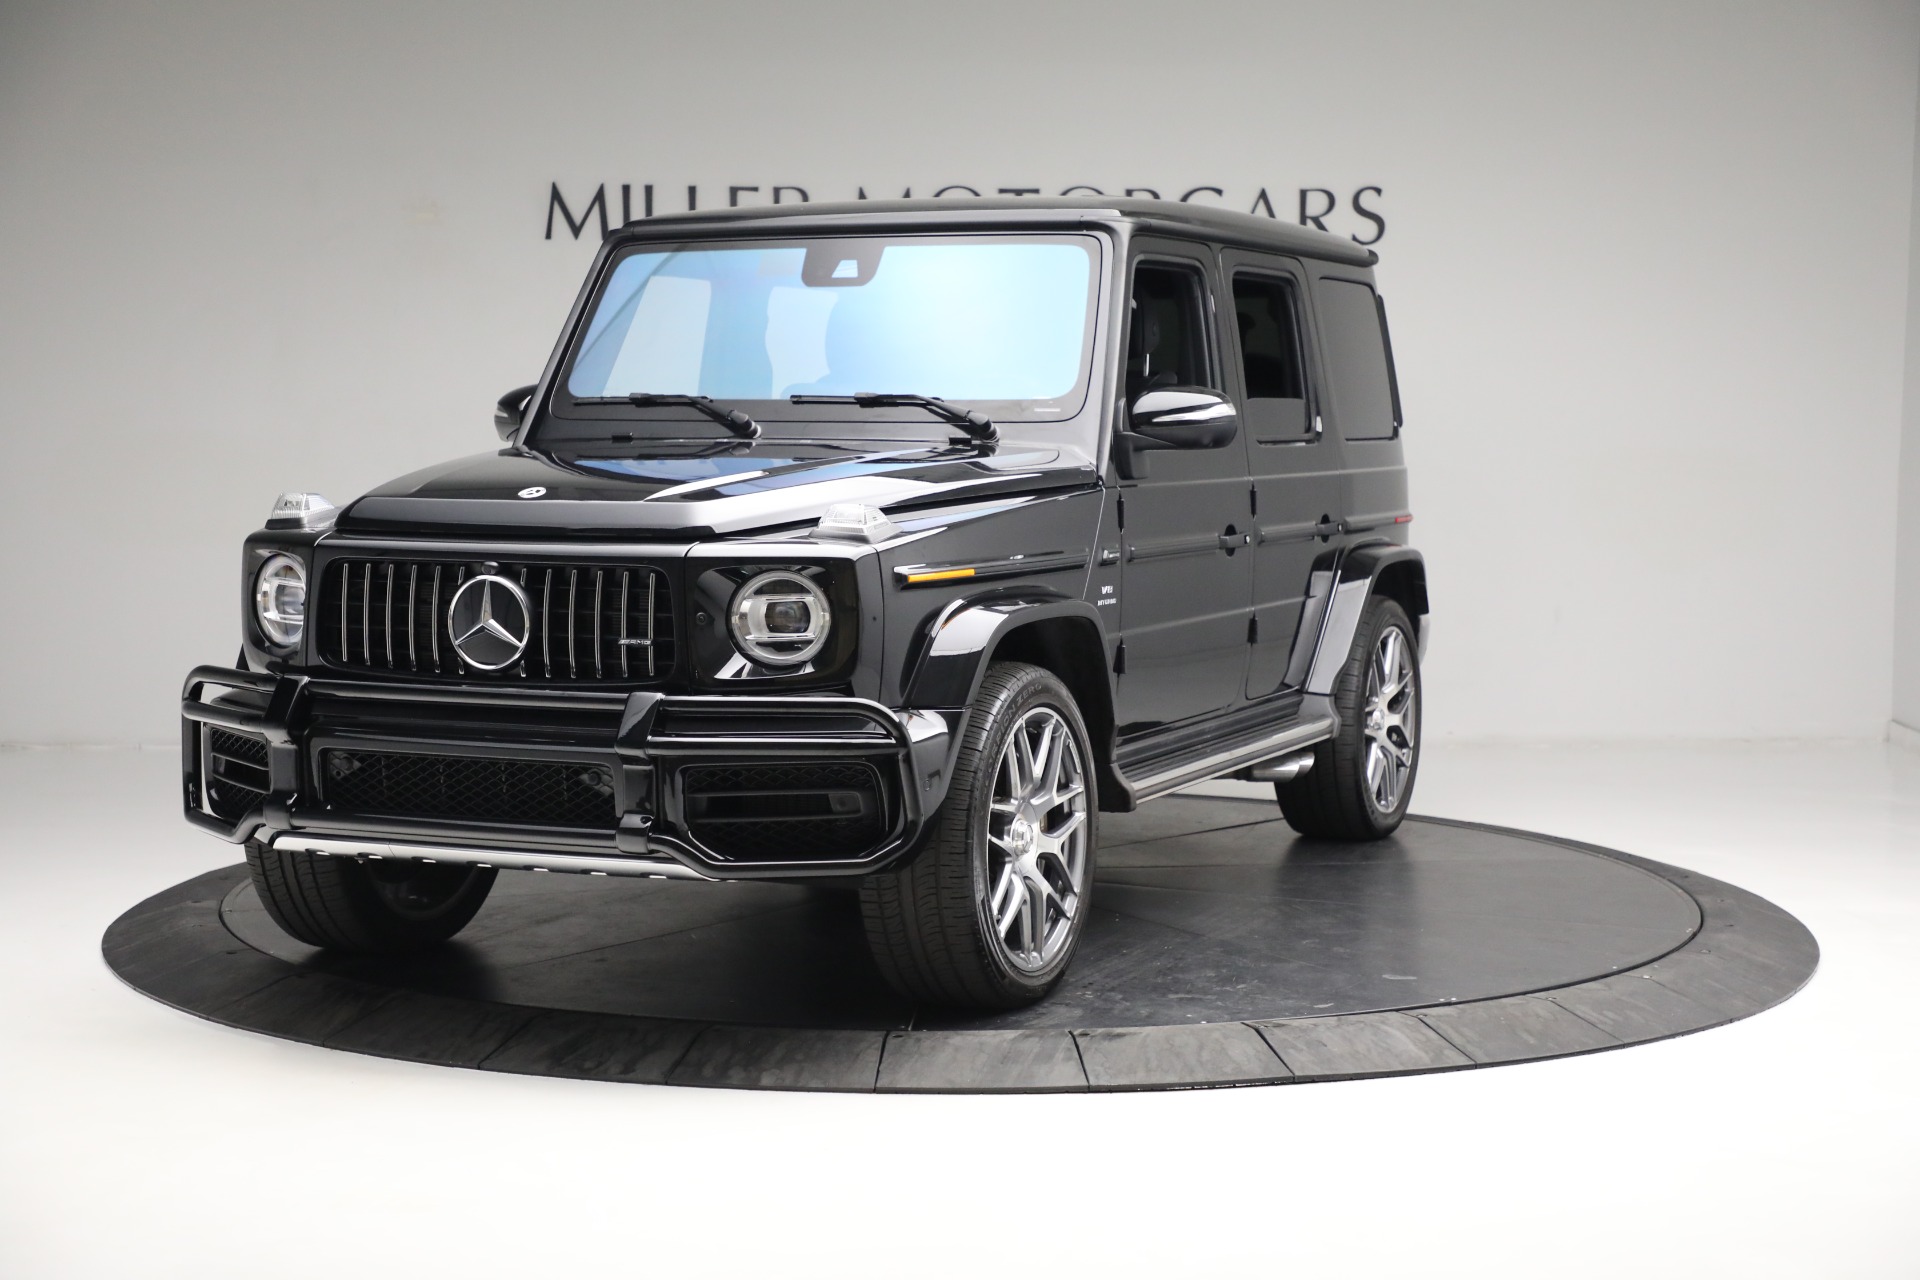 Used 2021 Mercedes-Benz G-Class AMG G 63 for sale $215,900 at Aston Martin of Greenwich in Greenwich CT 06830 1